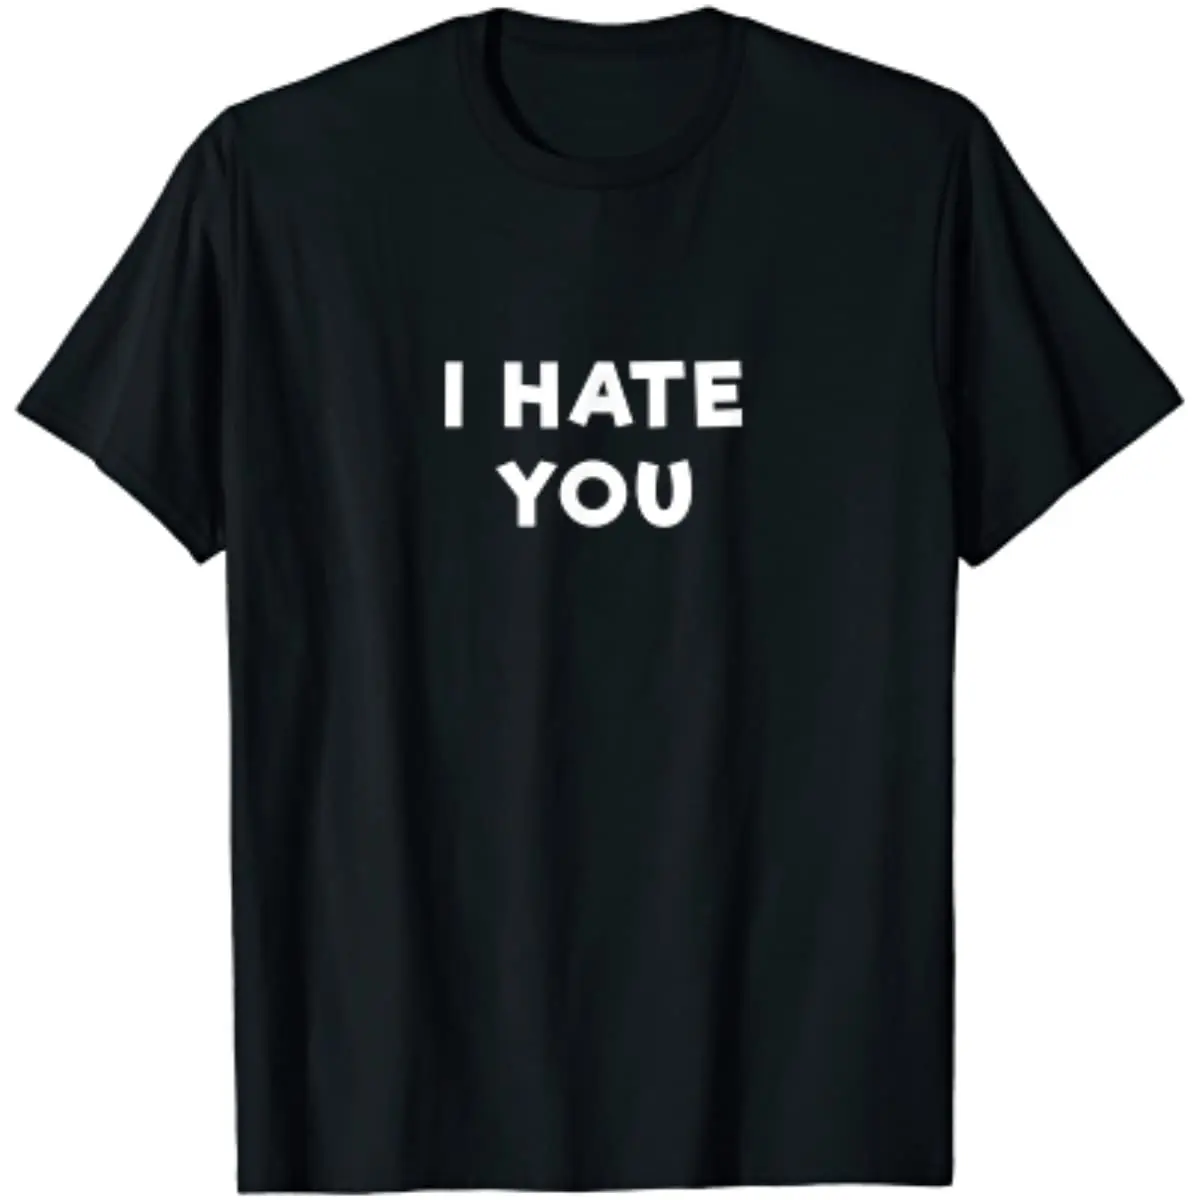 

I Hate You T Shirt Funny People Slogans Men Clothing Shirts for Women Casual Cotton Daily Four Seasons Tees Shirt